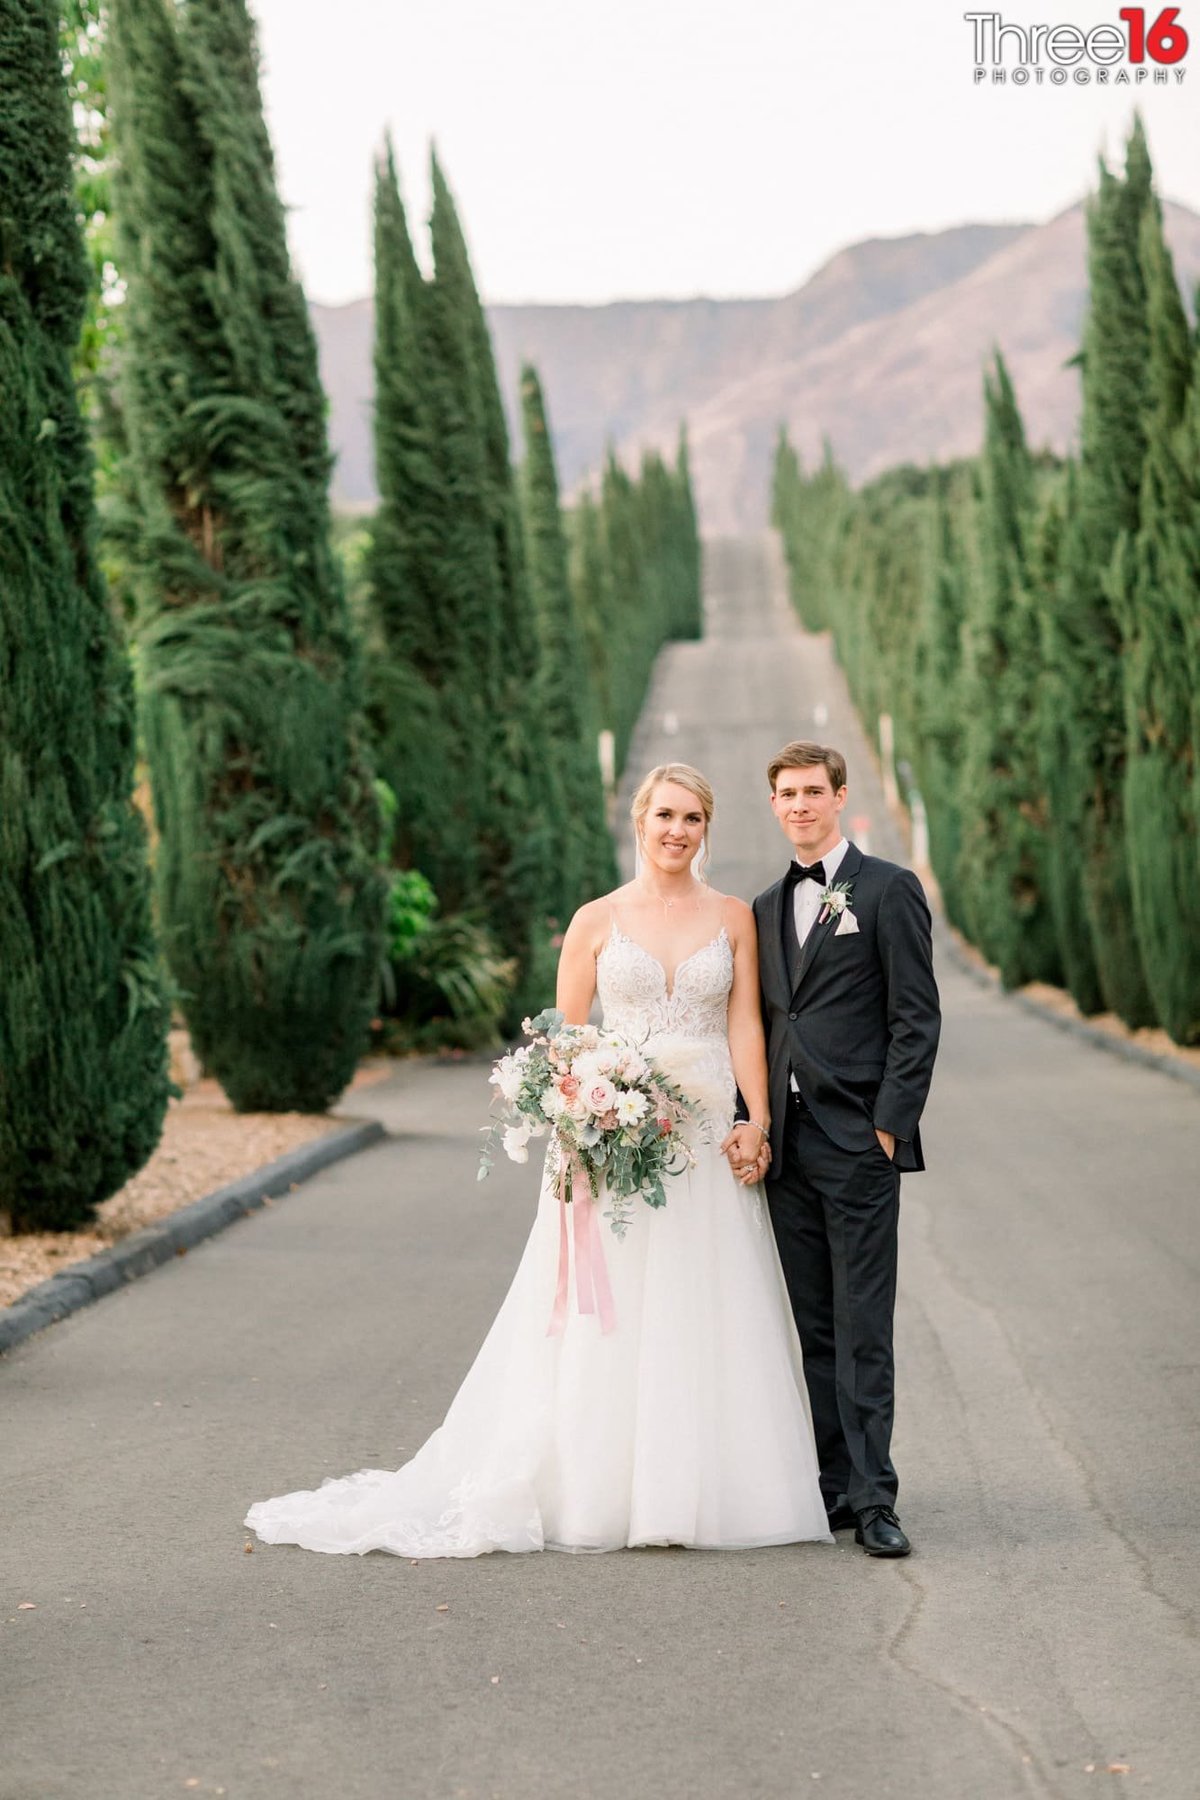 Bride and Groom stand in the street between tall green plants at the Bella Vista Groves wedding venue in Fillmore, CA